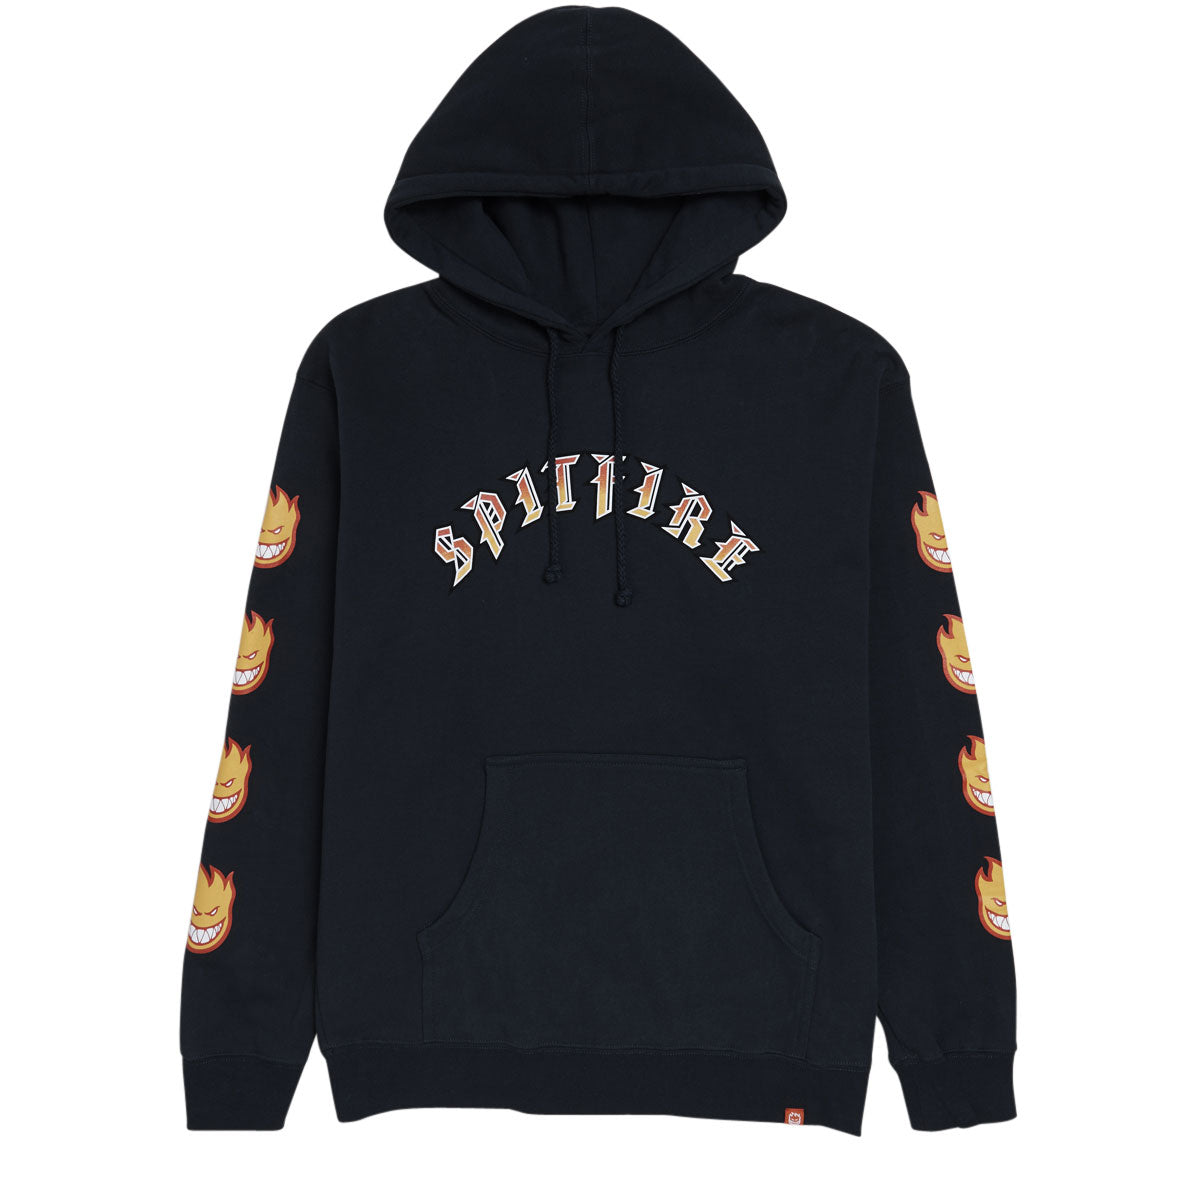 Spitfire Old E Bighead Fill Hoodie - Slate Blue/Gold/Red image 1